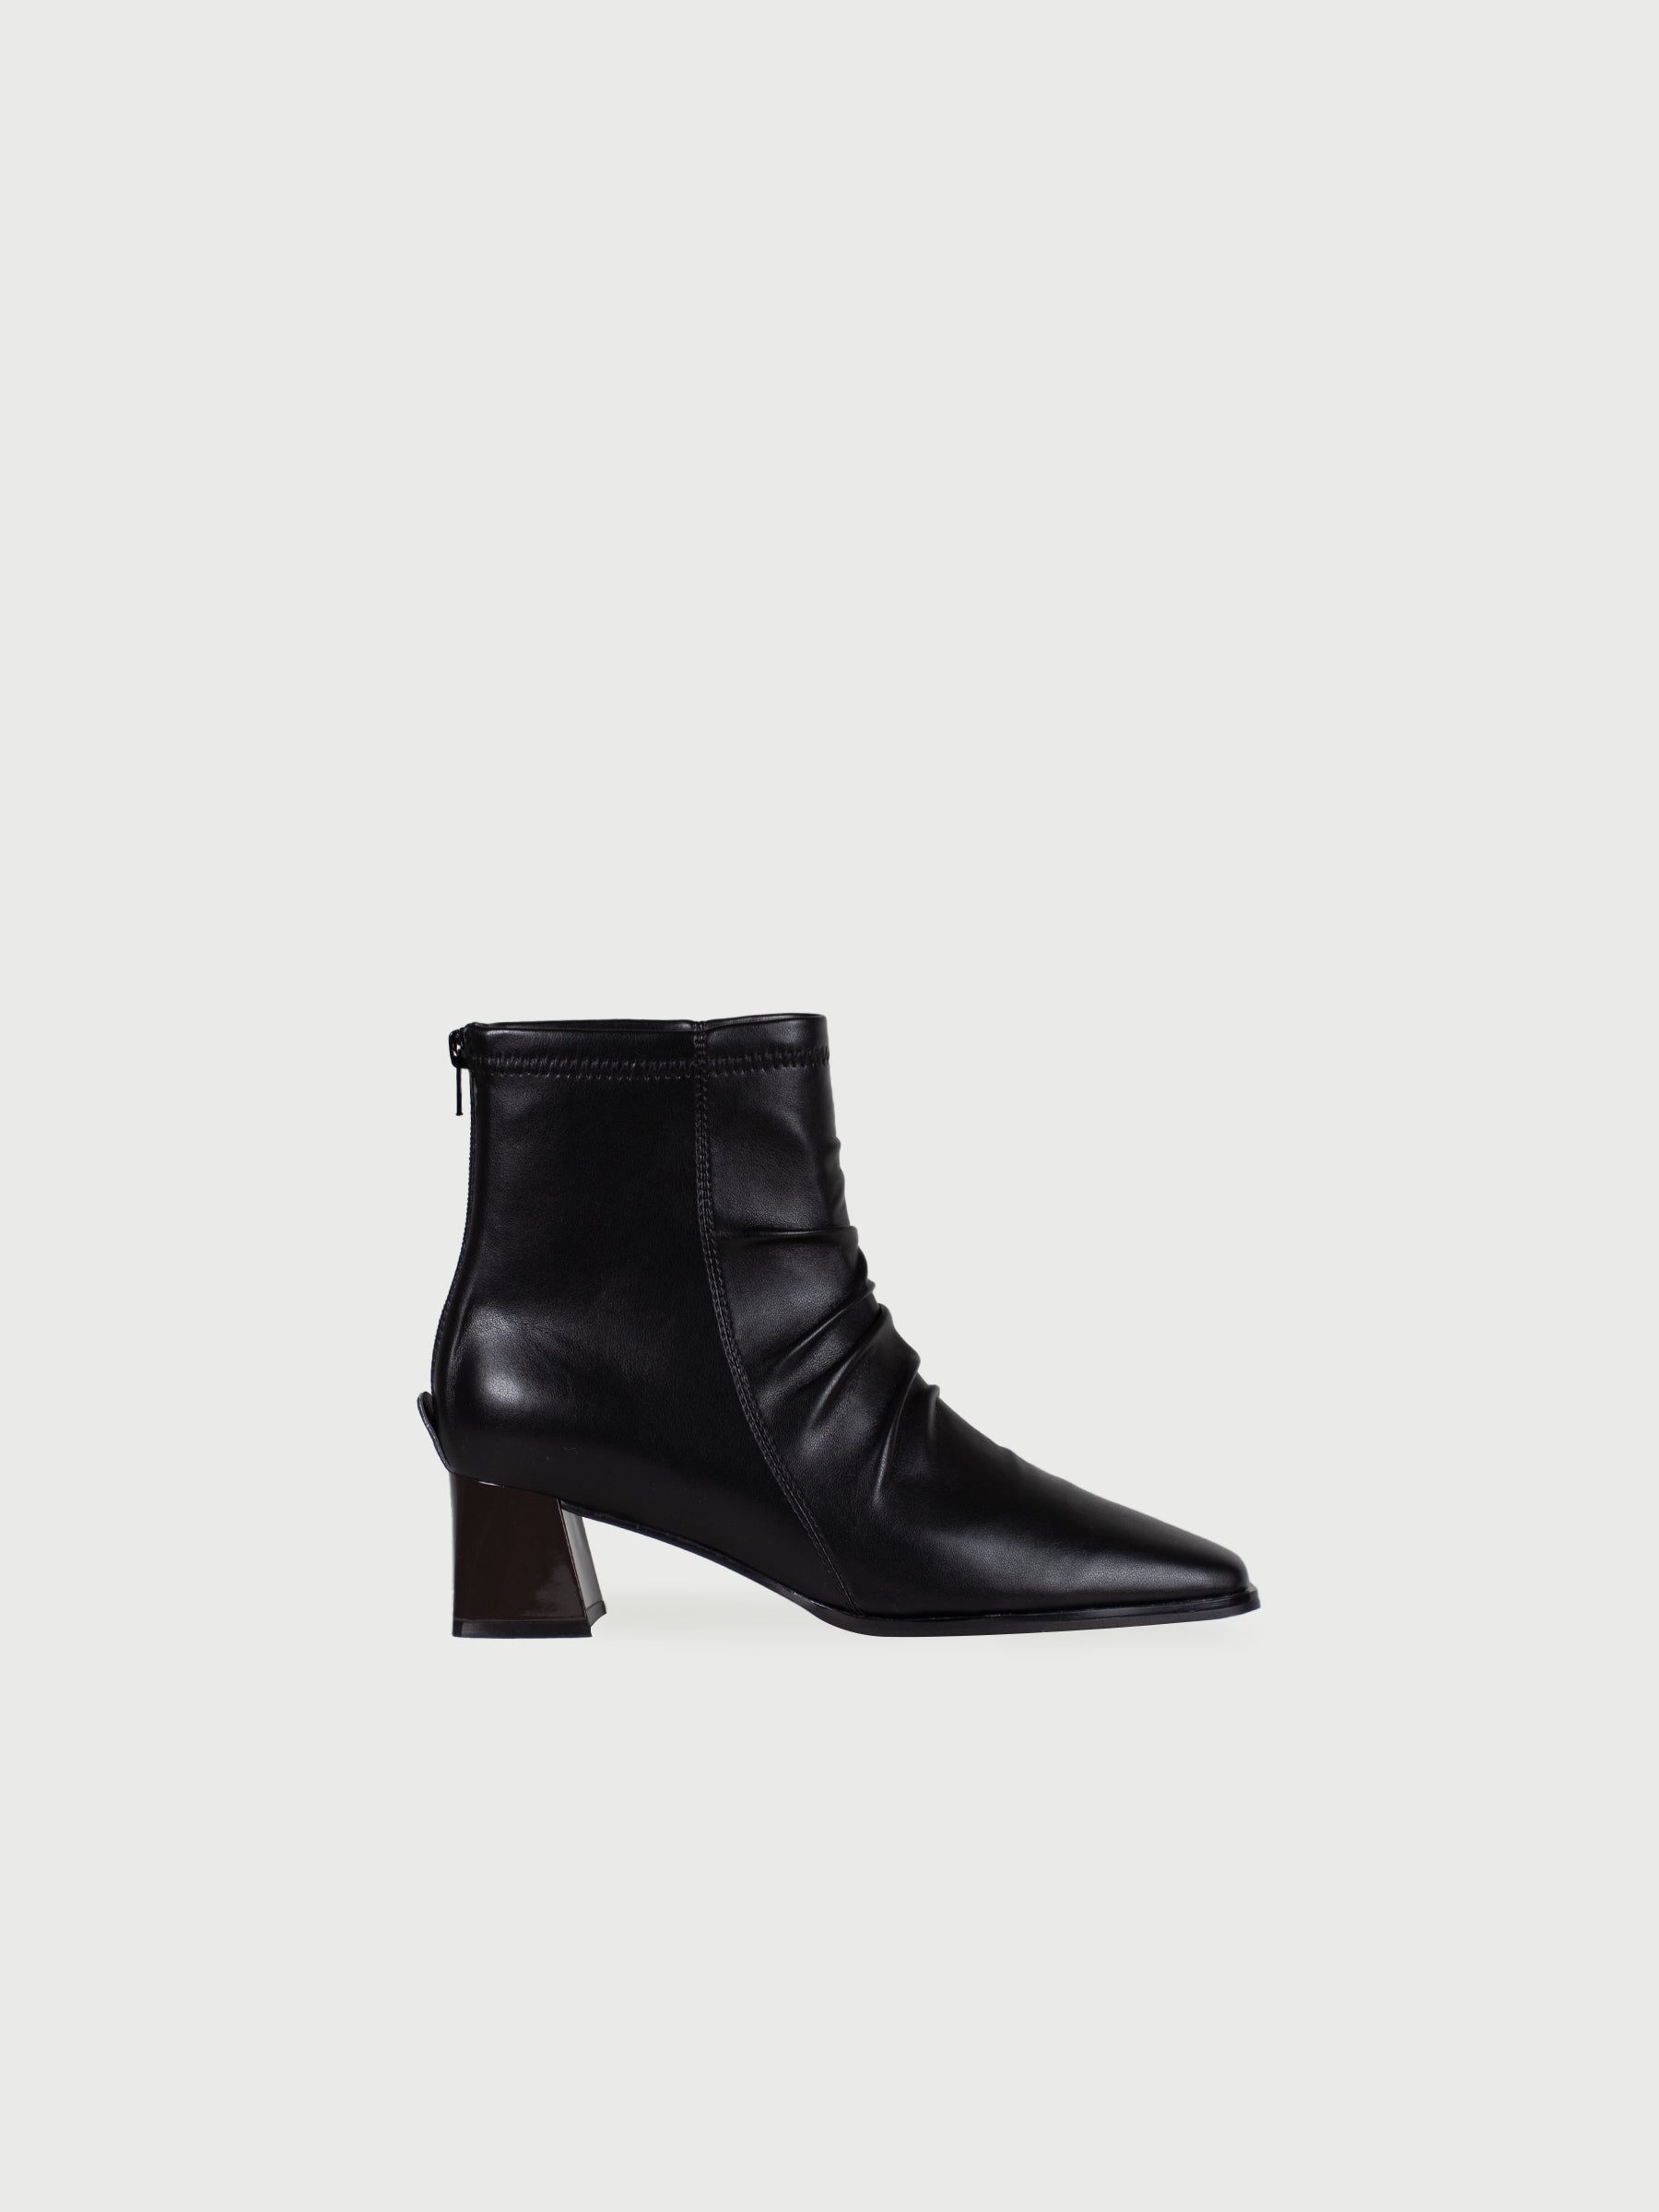 Draped High Heel Leather Boots